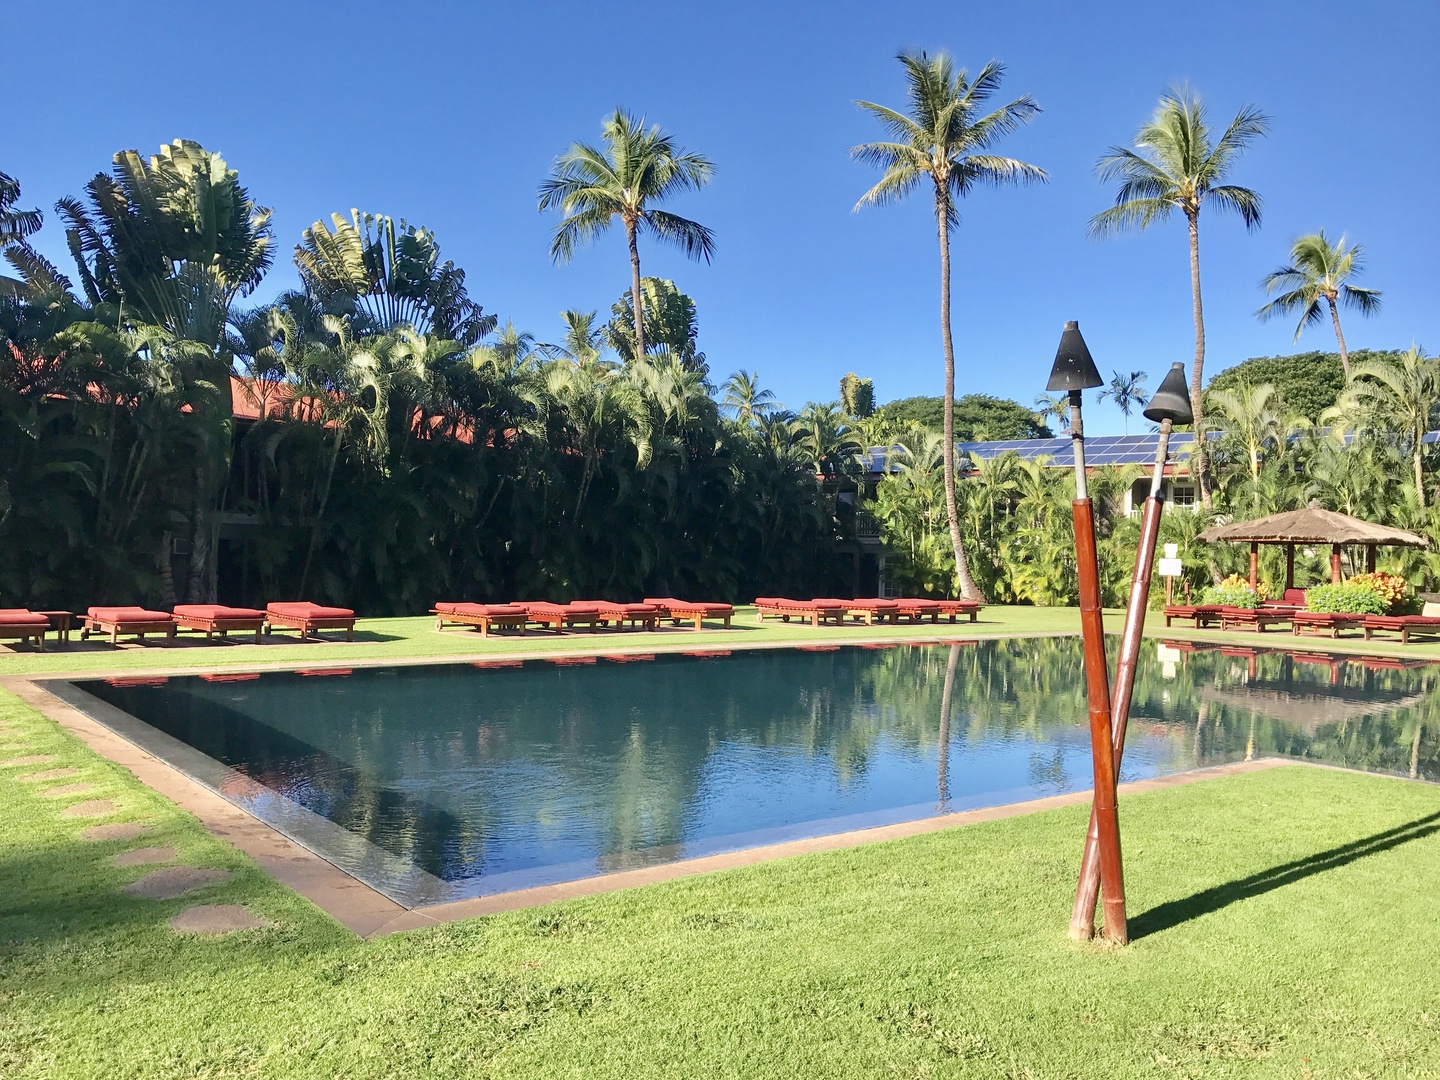 Lahaina Vacation Rentals, Aina Nalu D103 - Lounge in the sun and take a dip in the pool when you're ready to cool off